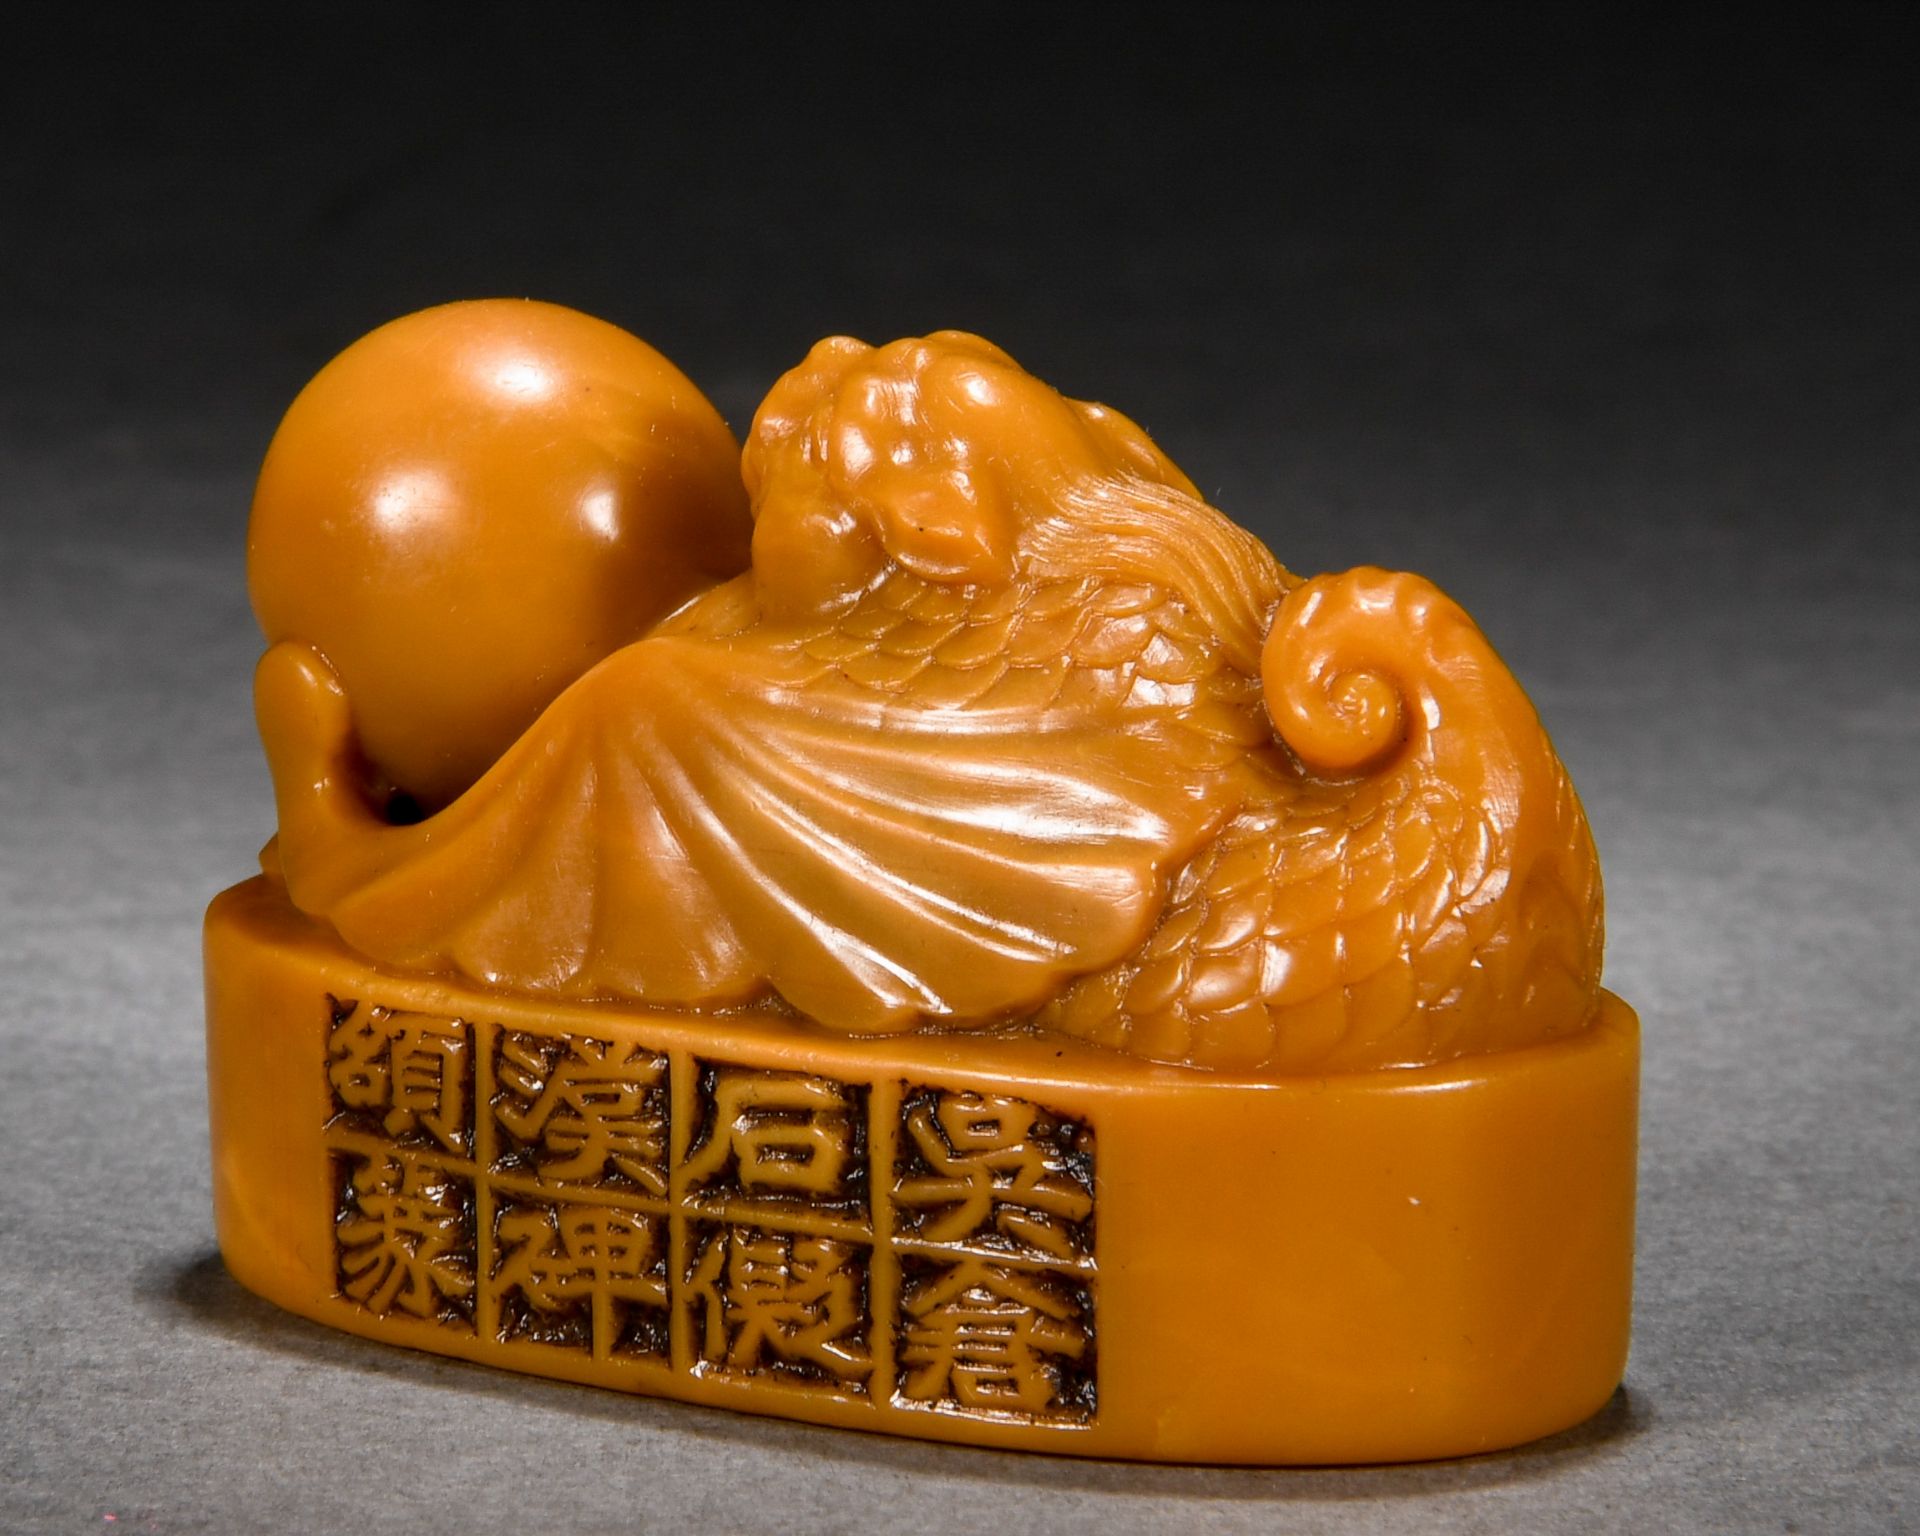 A Chinese Carved Tianhuang Beast Seal - Image 3 of 7